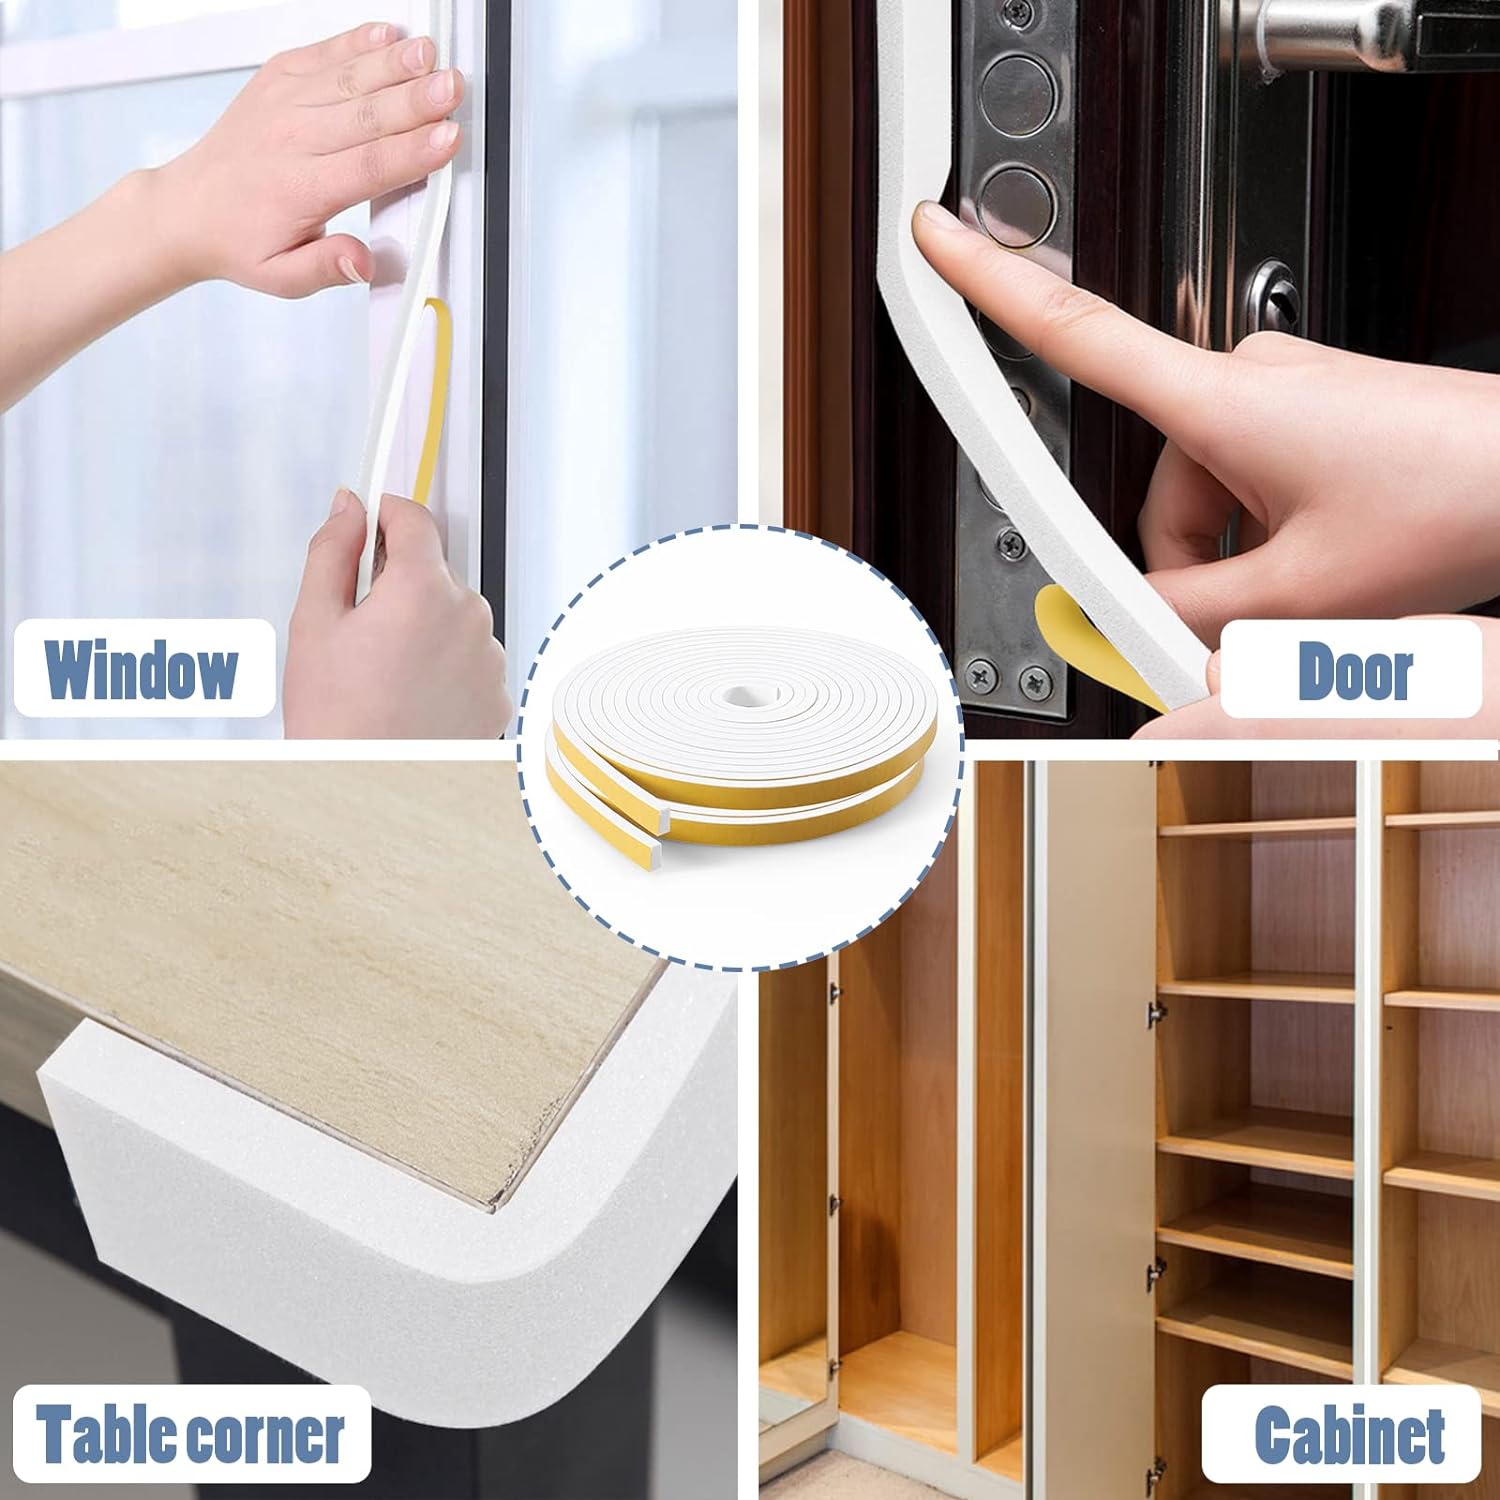 Hemour Weather Stripping Foam Insulation Tape - Self Adhesive White Door Weather Stripping Window Seal Air Conditioning Seal Strip for